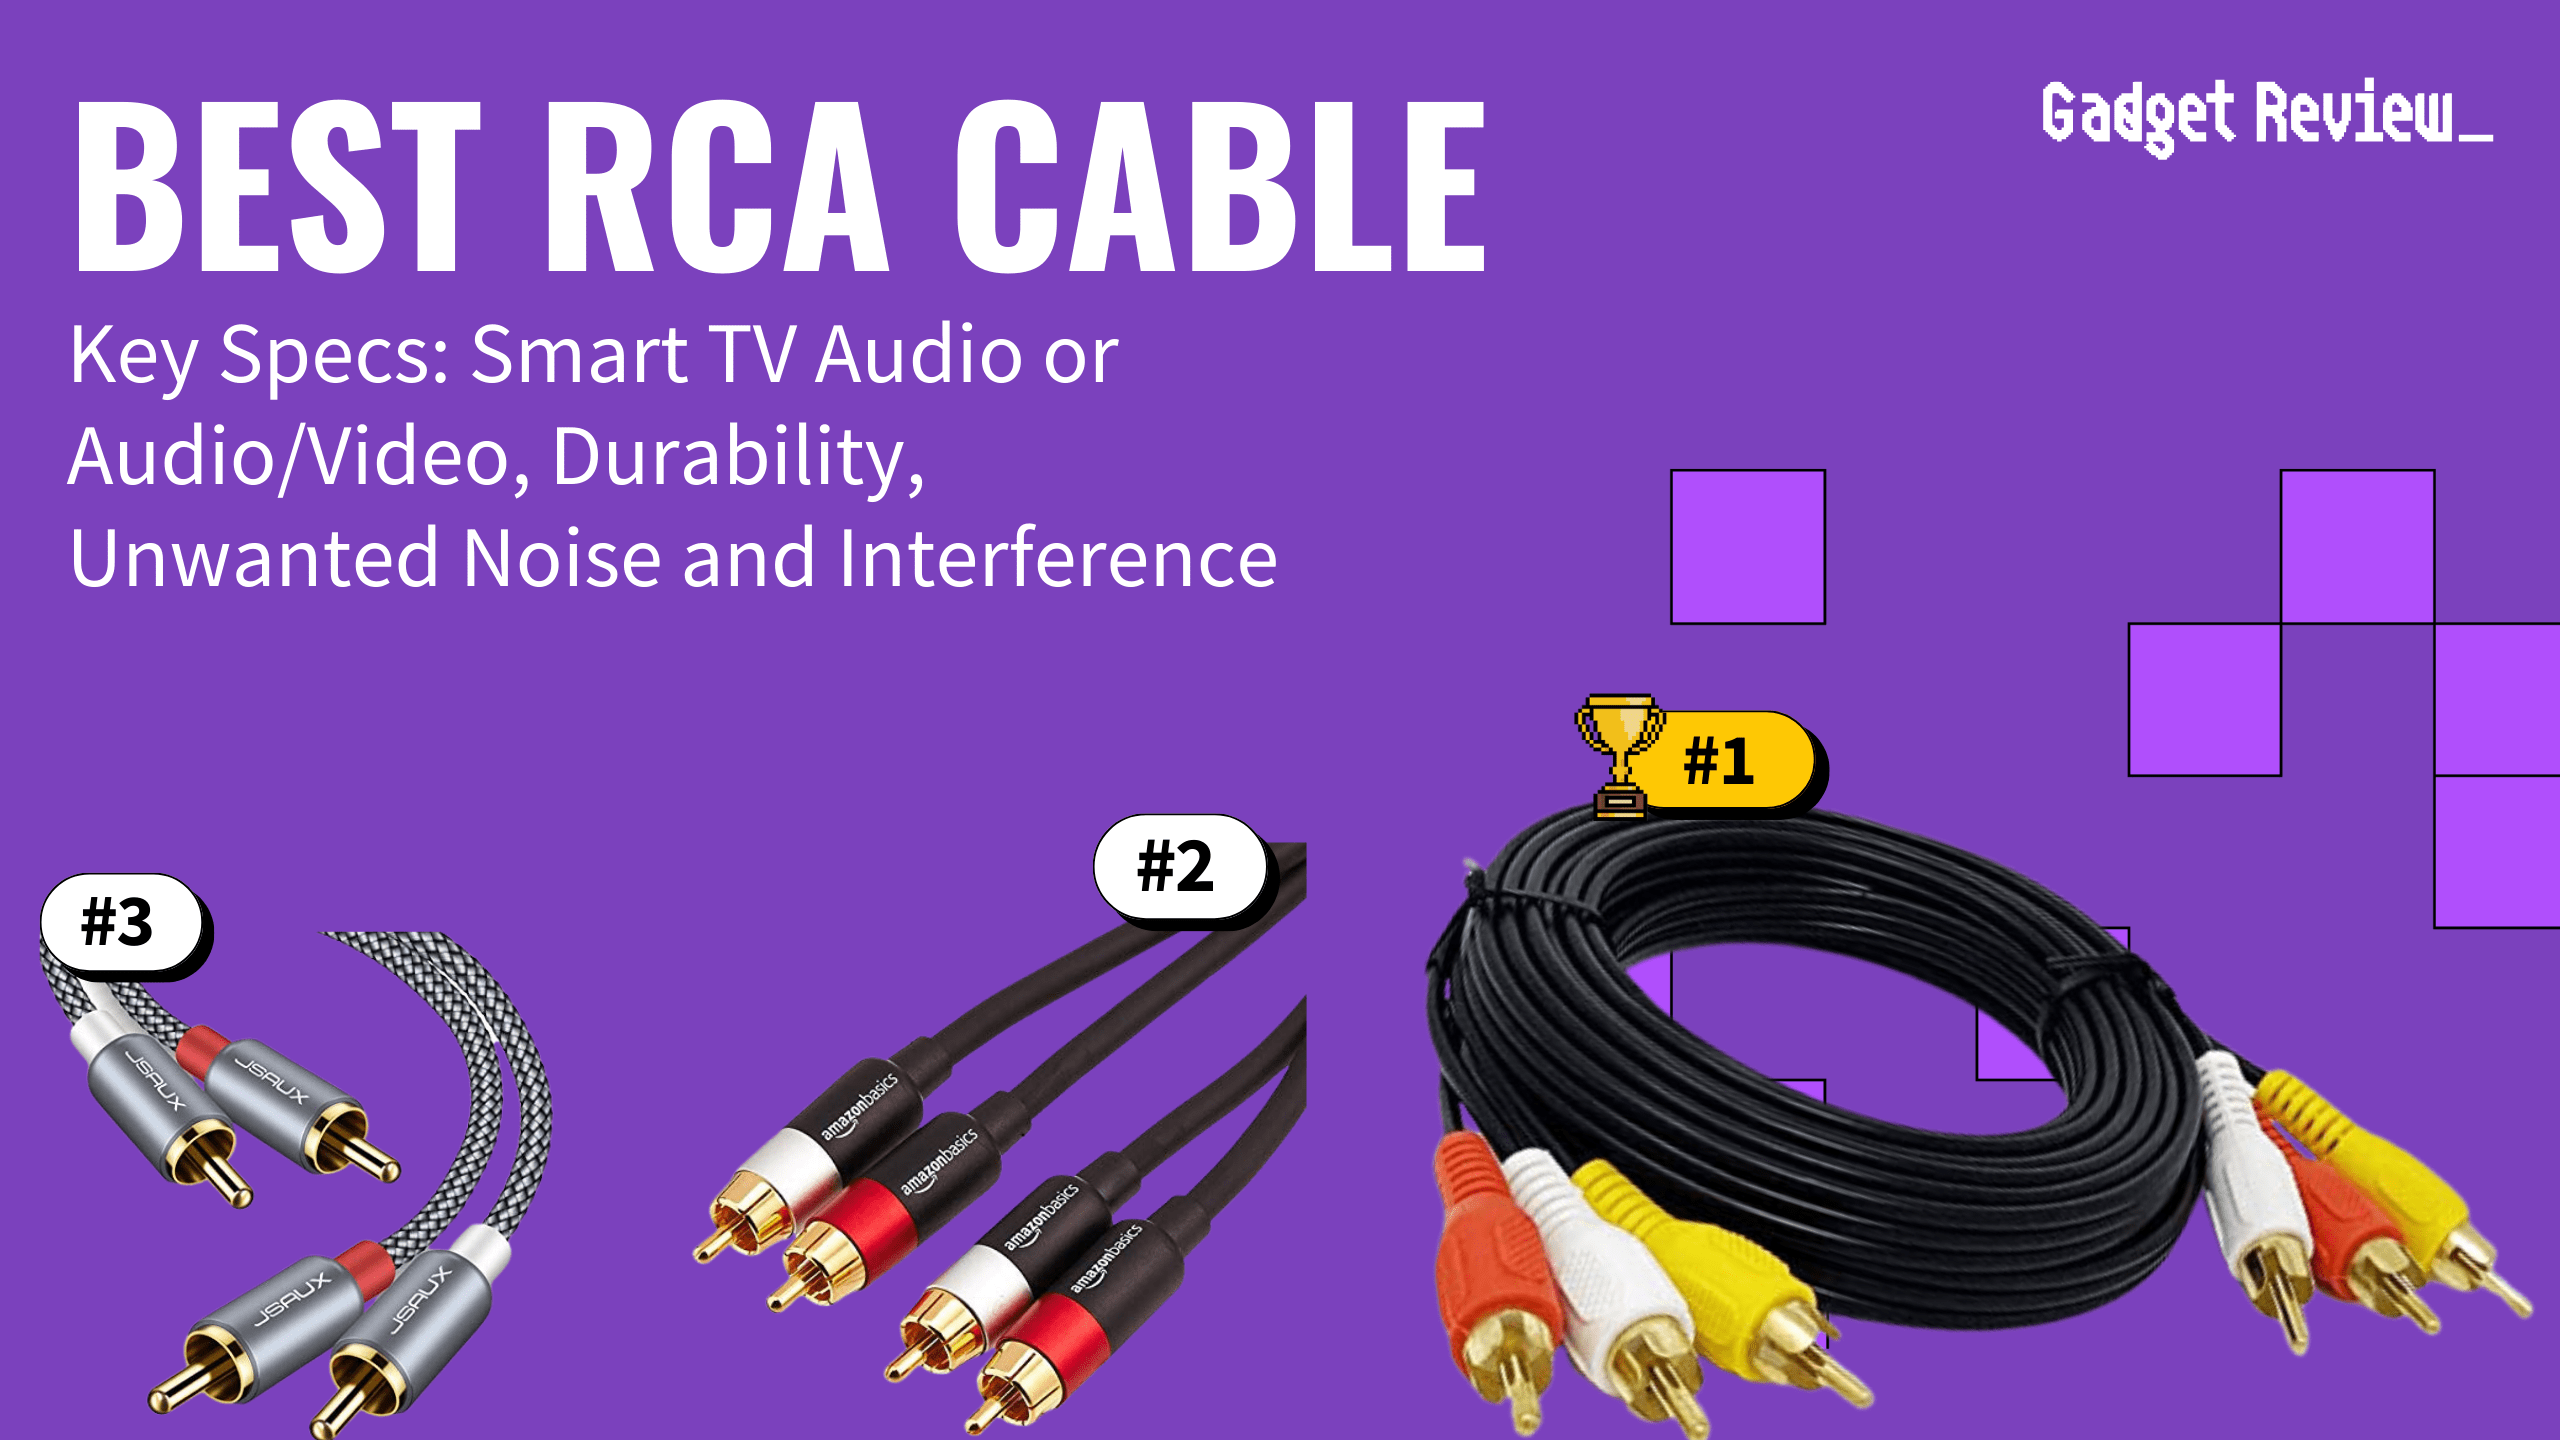 best rca cables featured image that shows the top three best speaker models